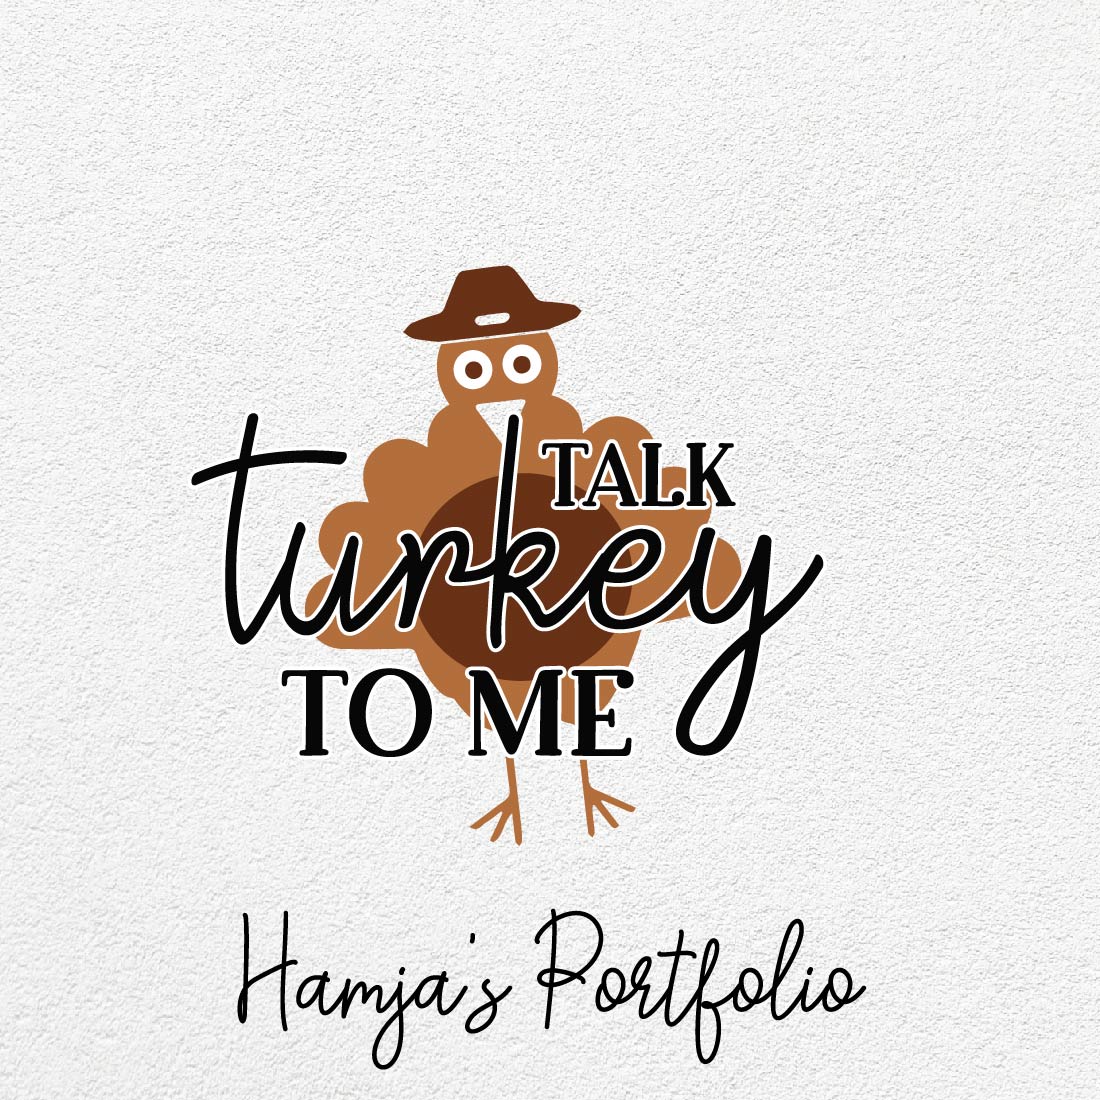 Talk Turkey To Me Vector cover image.